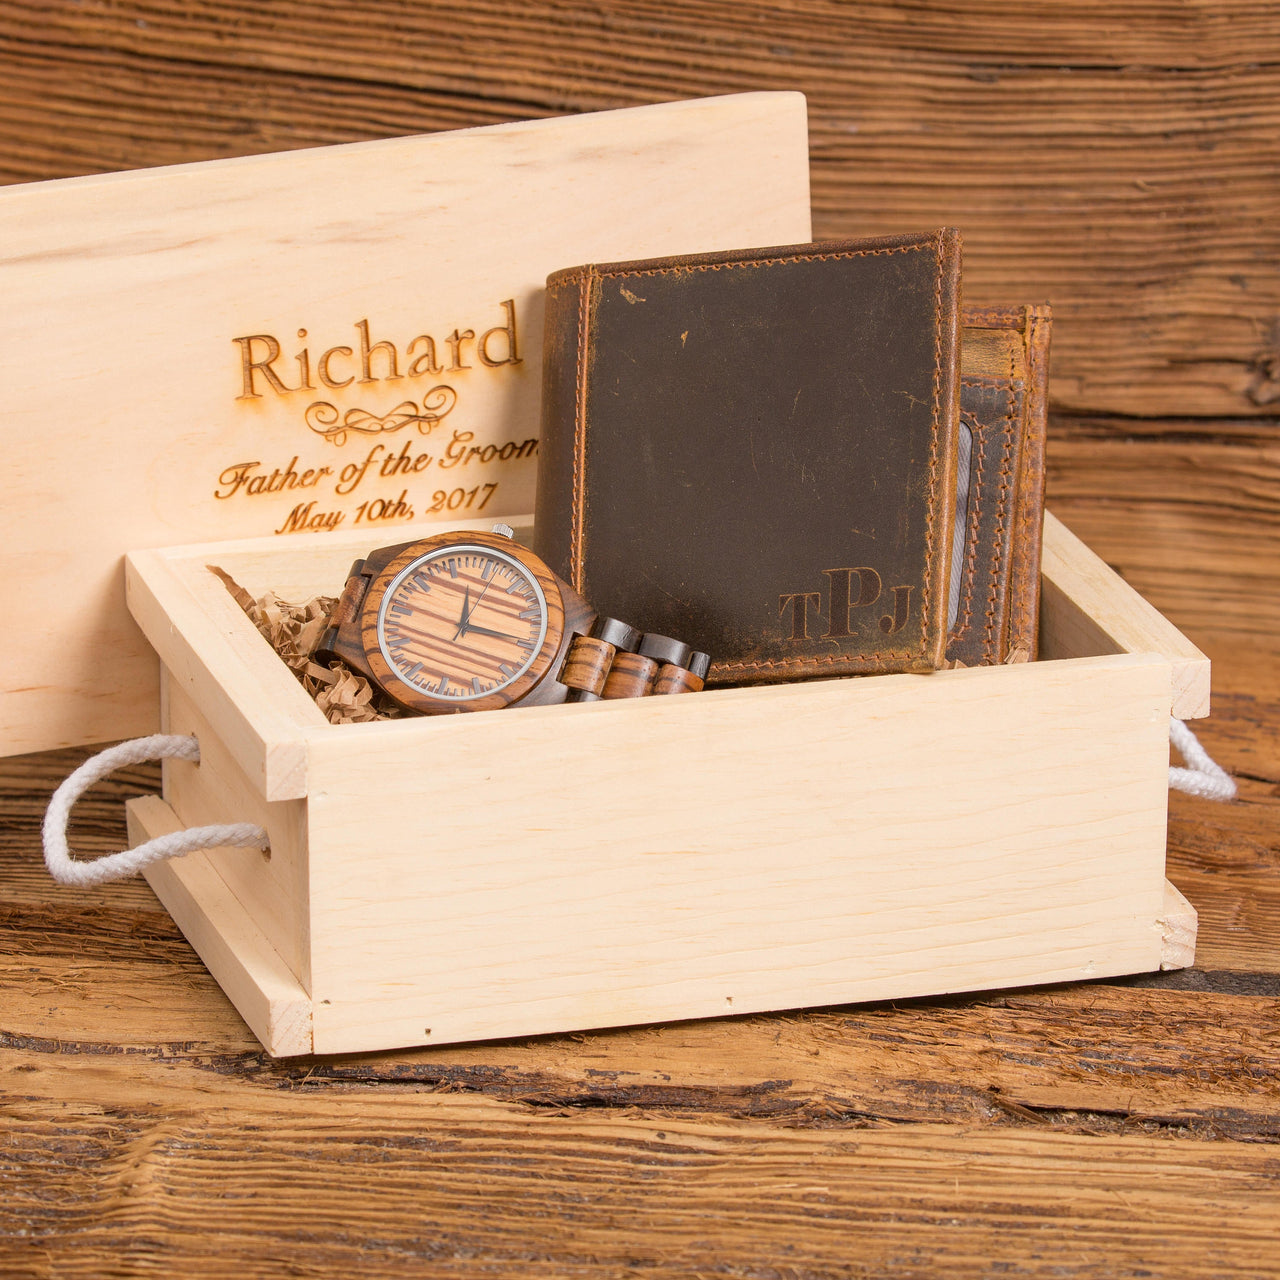 Personalized Wooden Watch and Monogram Leather Wallet